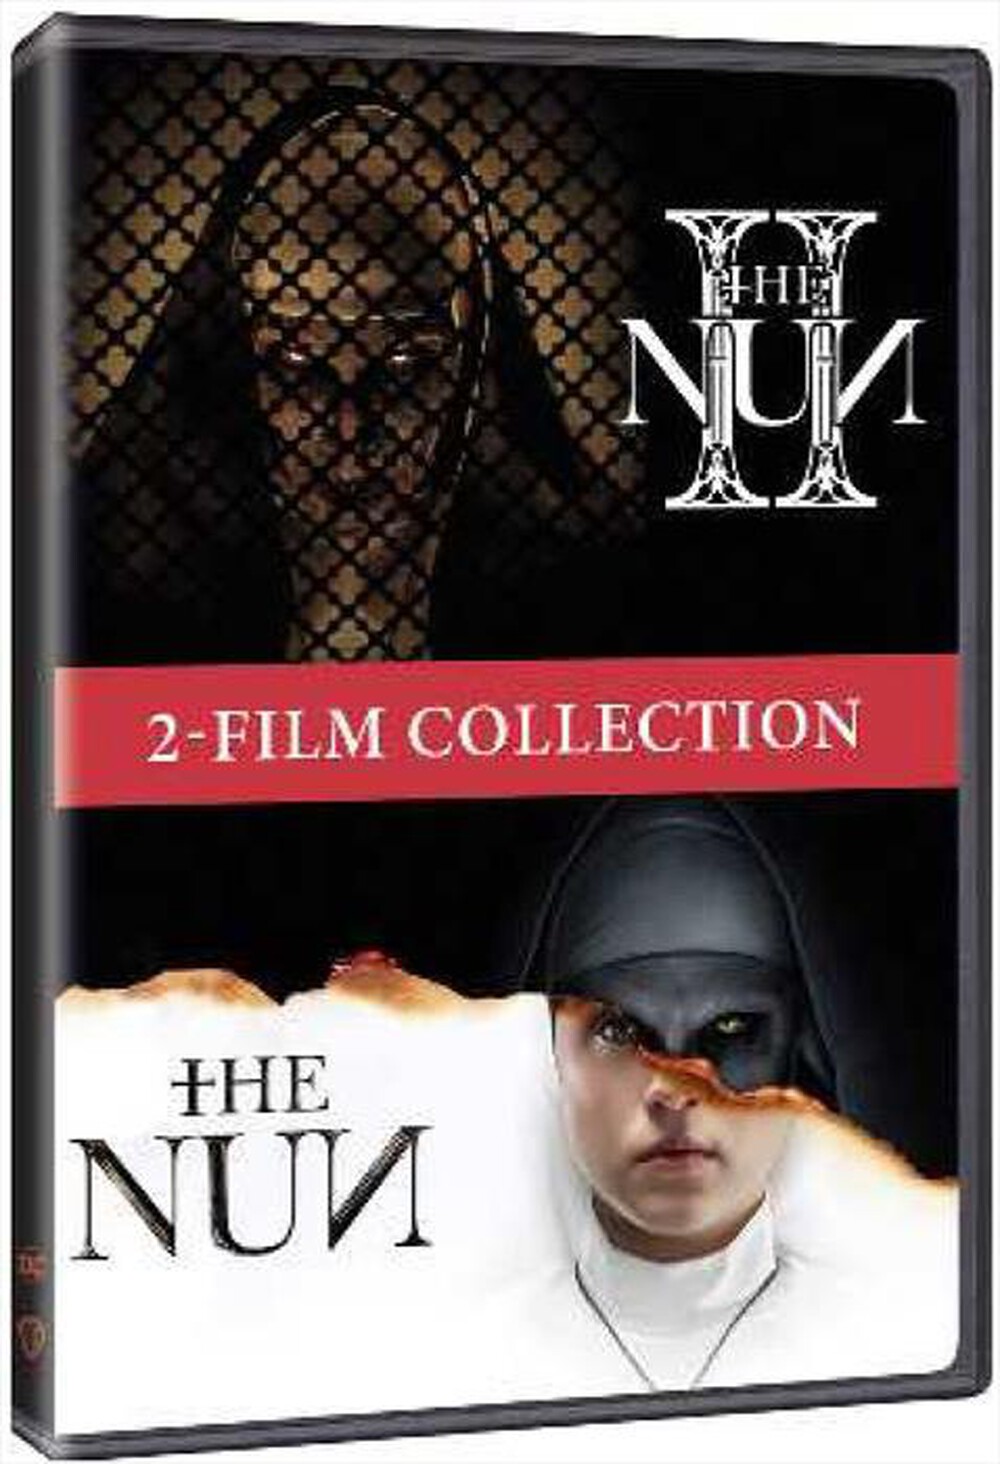 "WARNER HOME VIDEO - Nun (The) - 2 Film Collection (2 Dvd)"